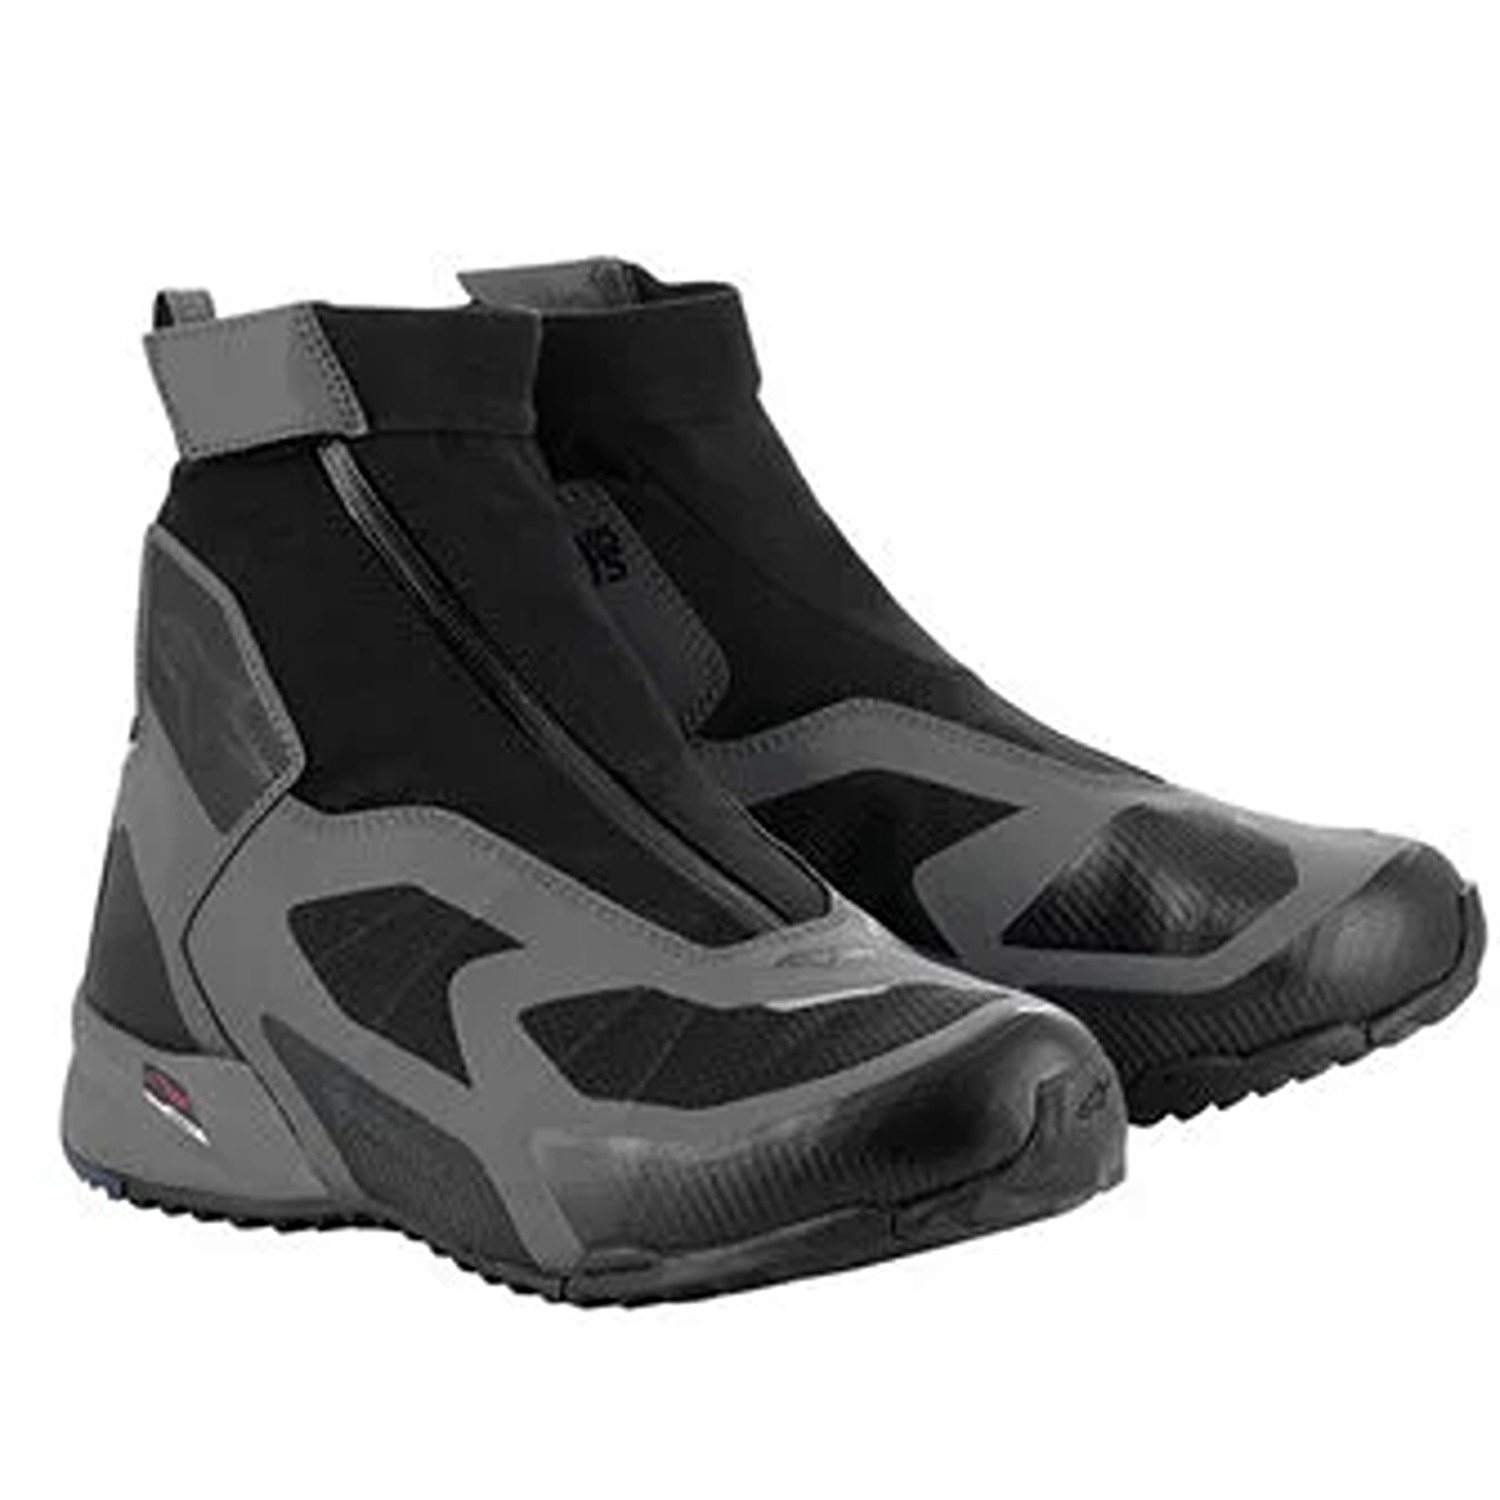 Image of EU Alpinestars CR-8 Gore-Tex Shoes Black Mid Gray Bright Red Taille US 6